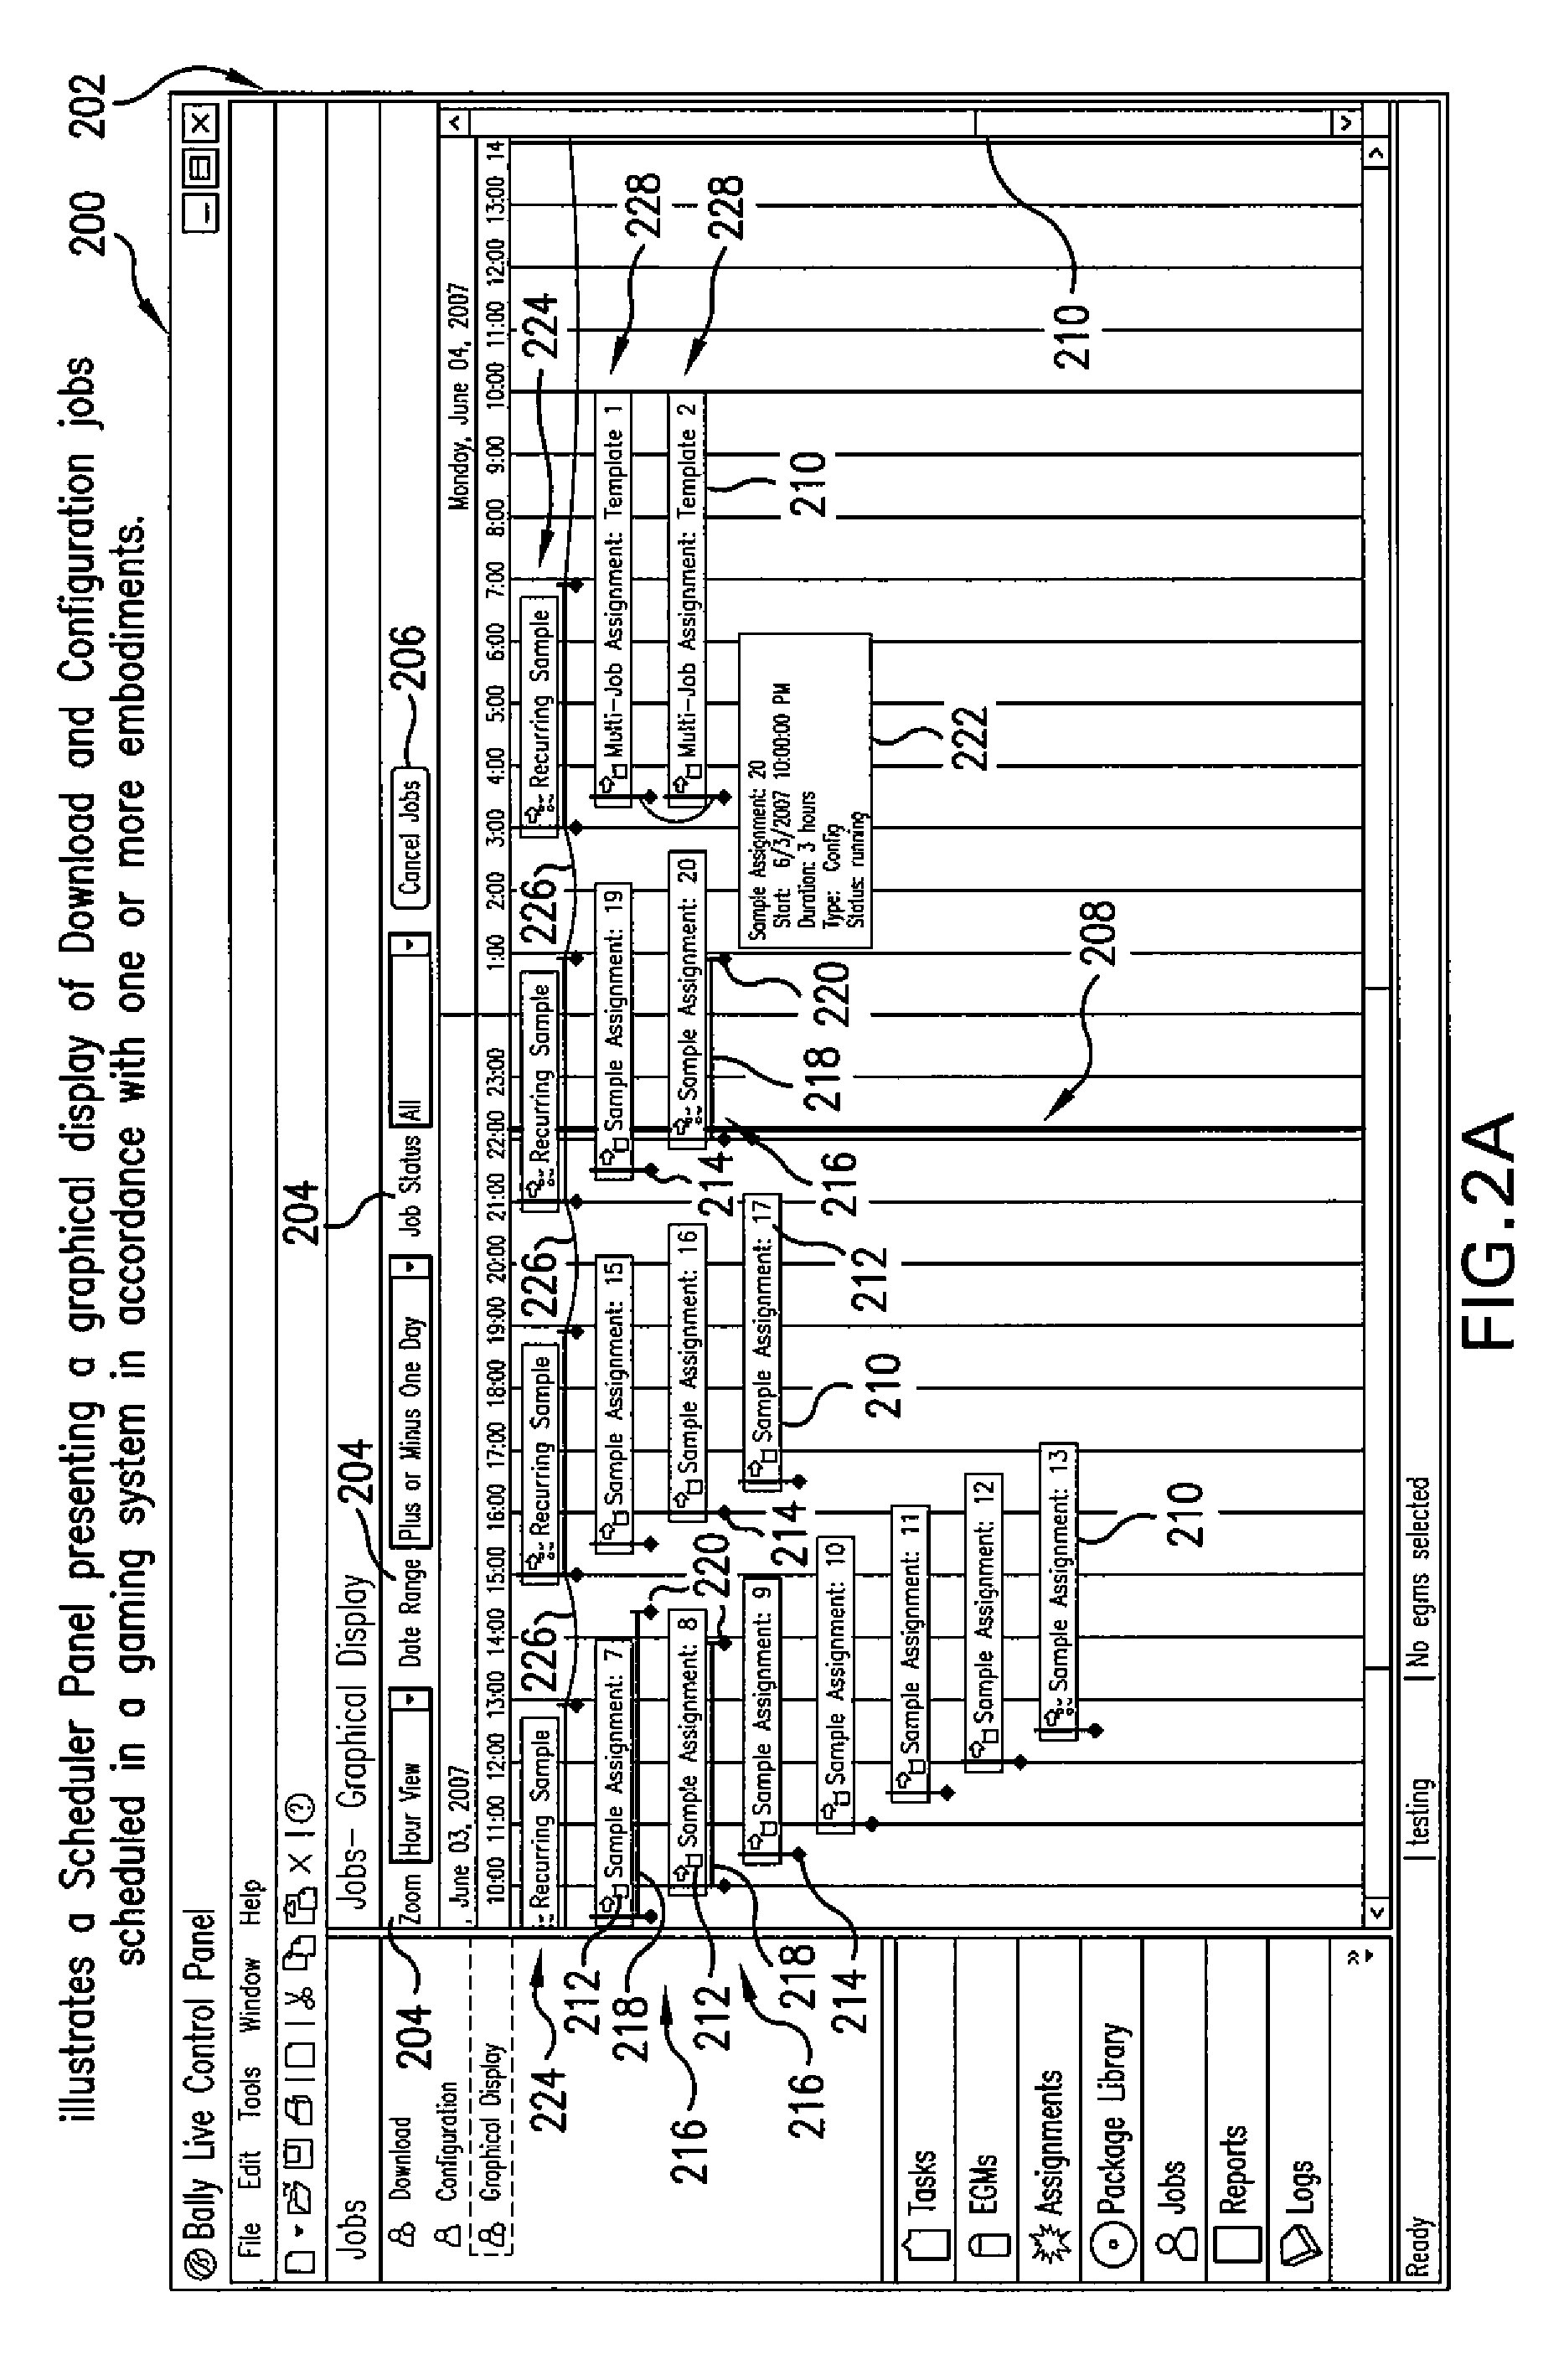 Method and system for providing download and configuration job progress tracking and display via host user interface